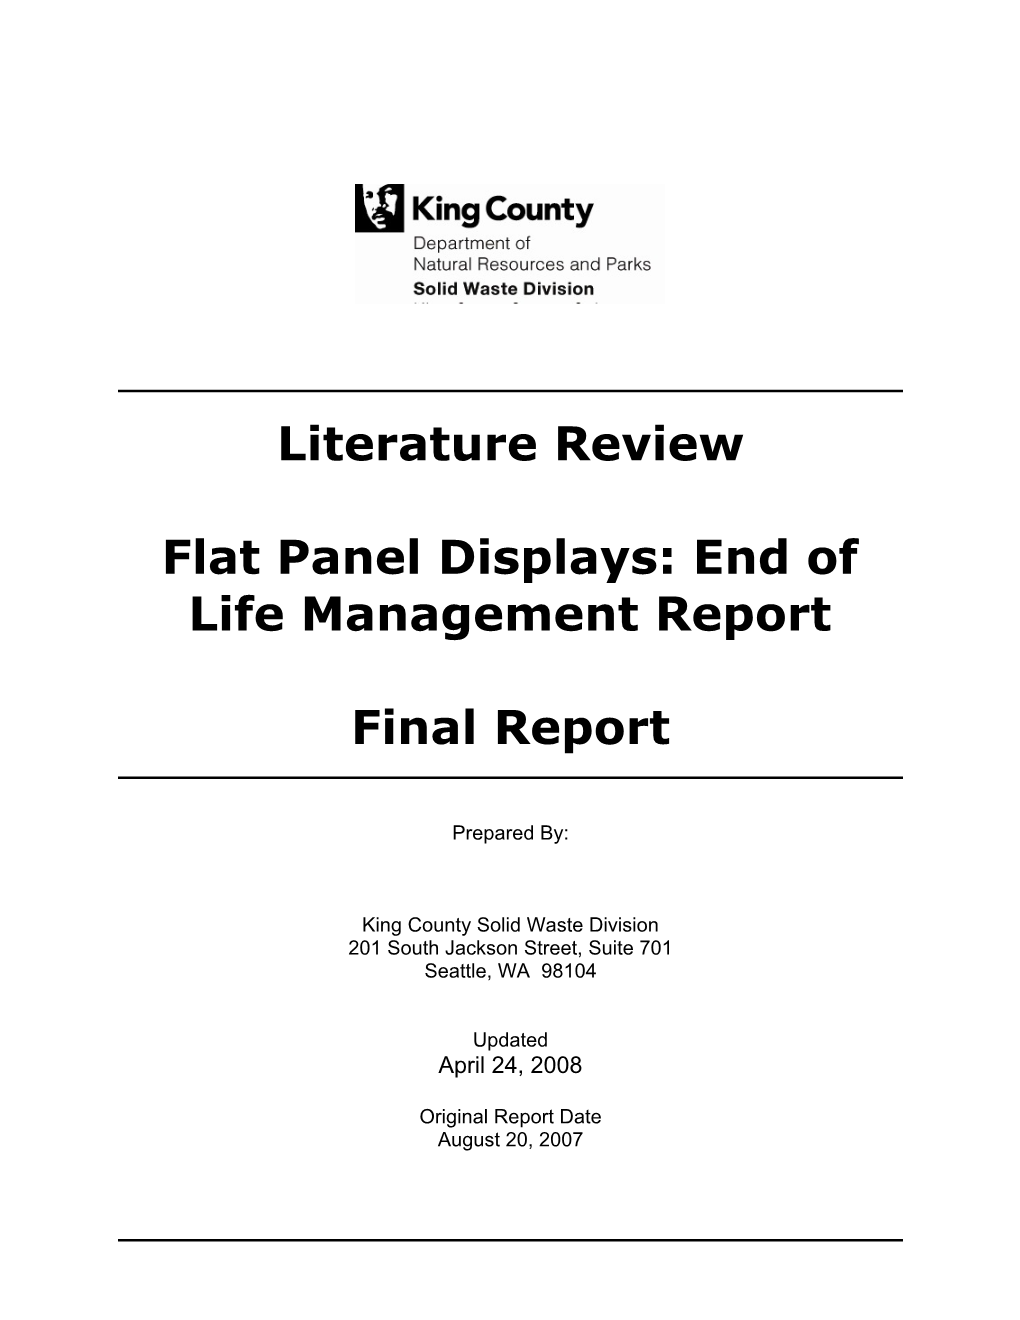 Flat Panel Displays: End of Life Management Report